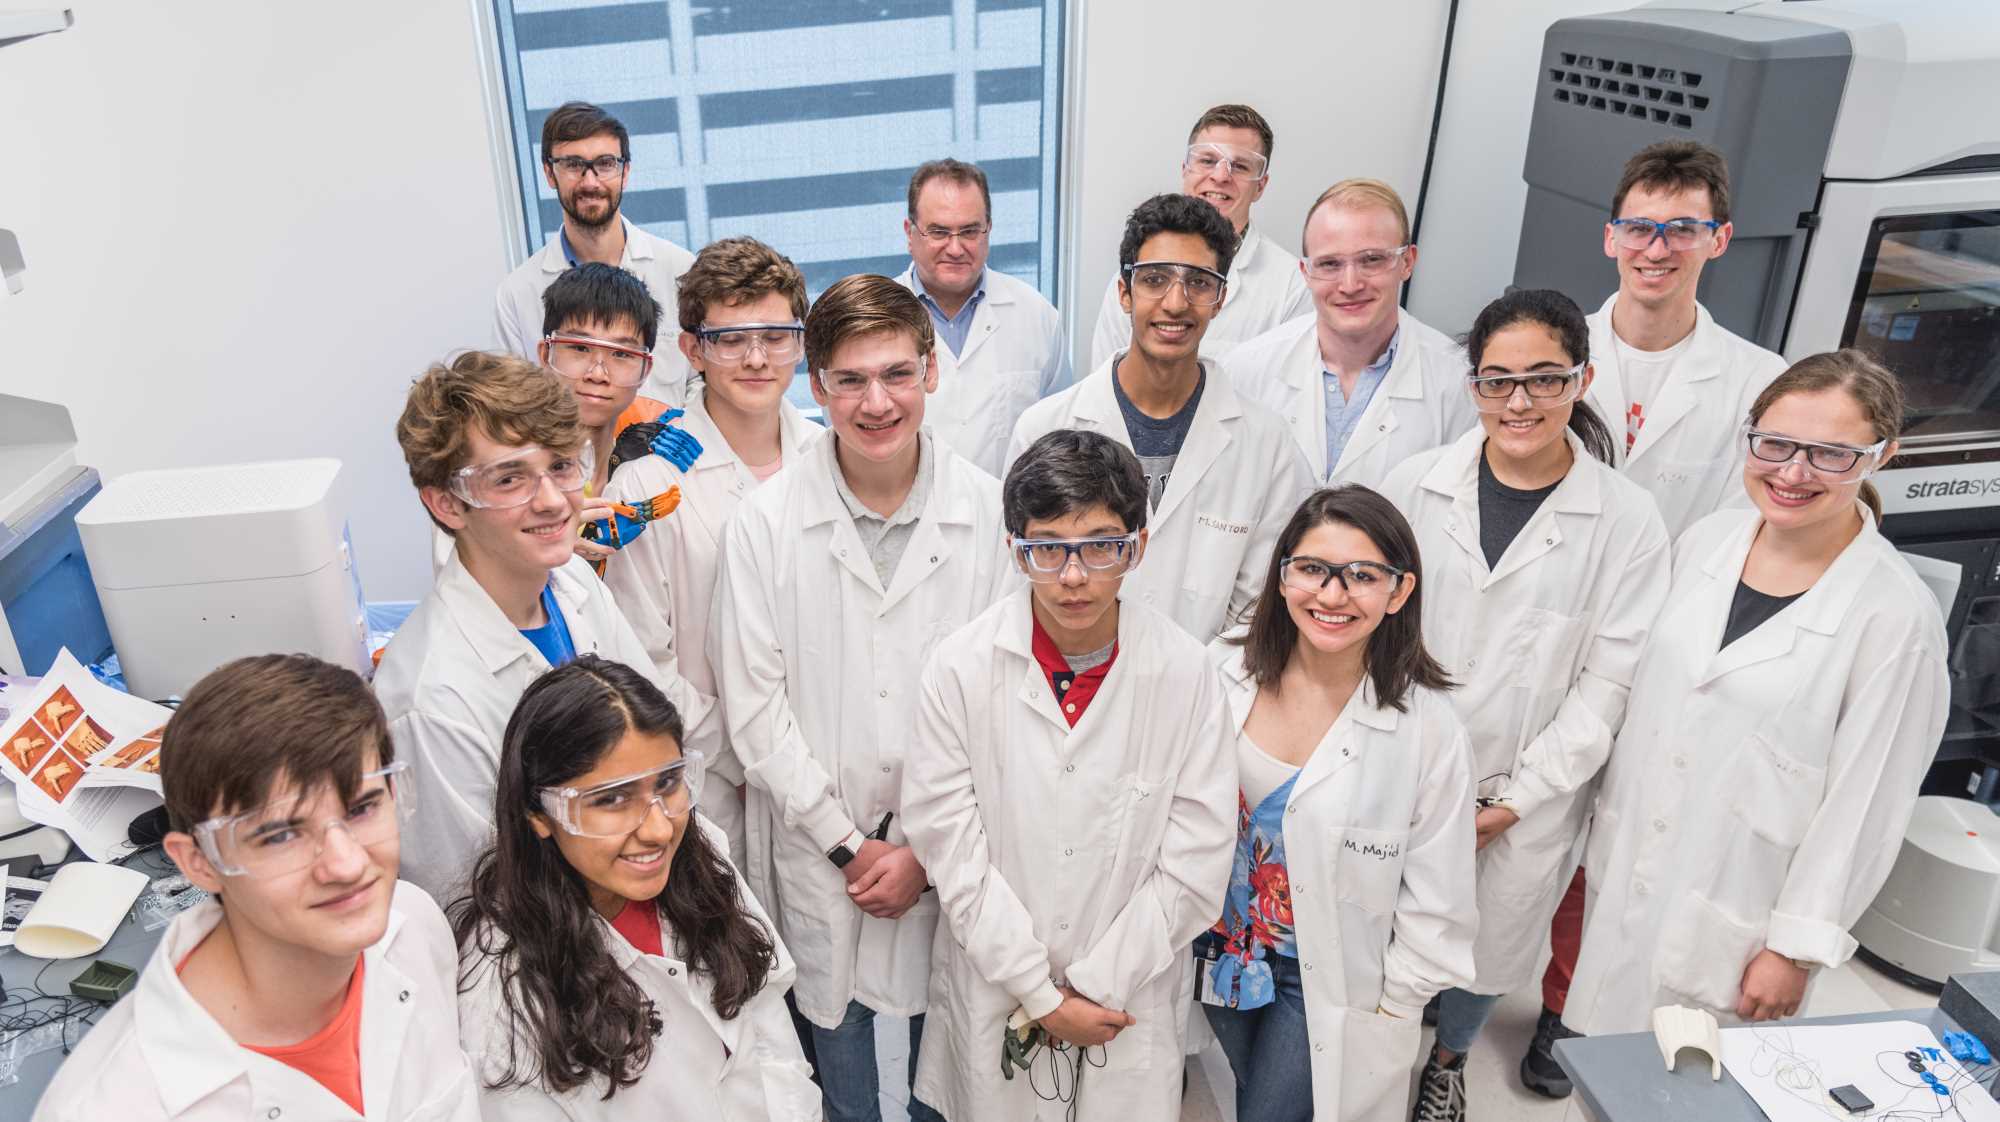 A group photo in the Biomaterials Lab